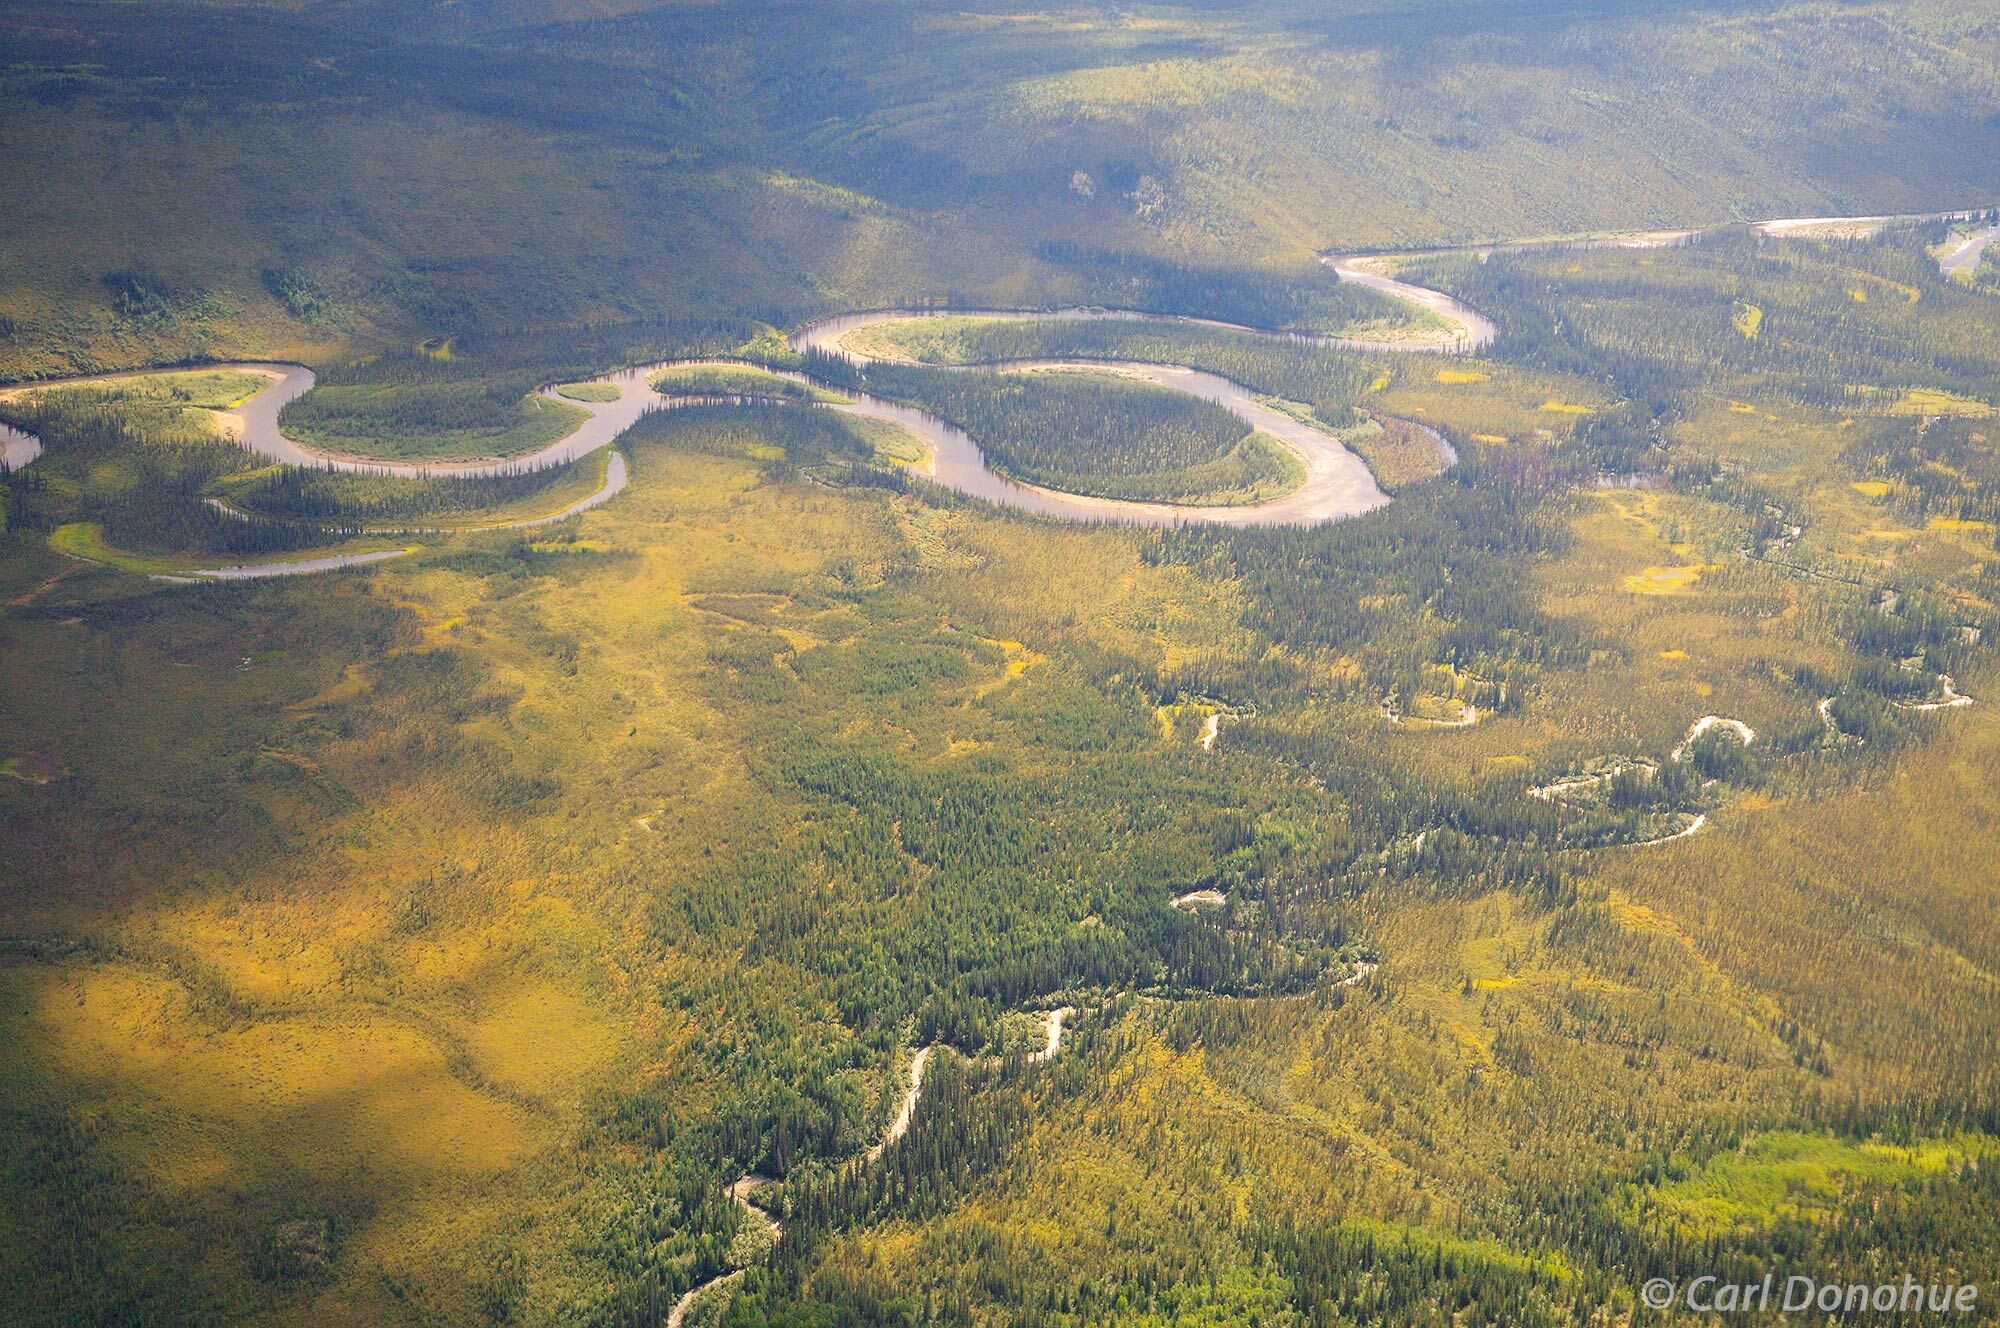 Alatna River, meandering across the tundra near the foothills of the Brooks Mountain Range, Gates of the Arctic National Park...